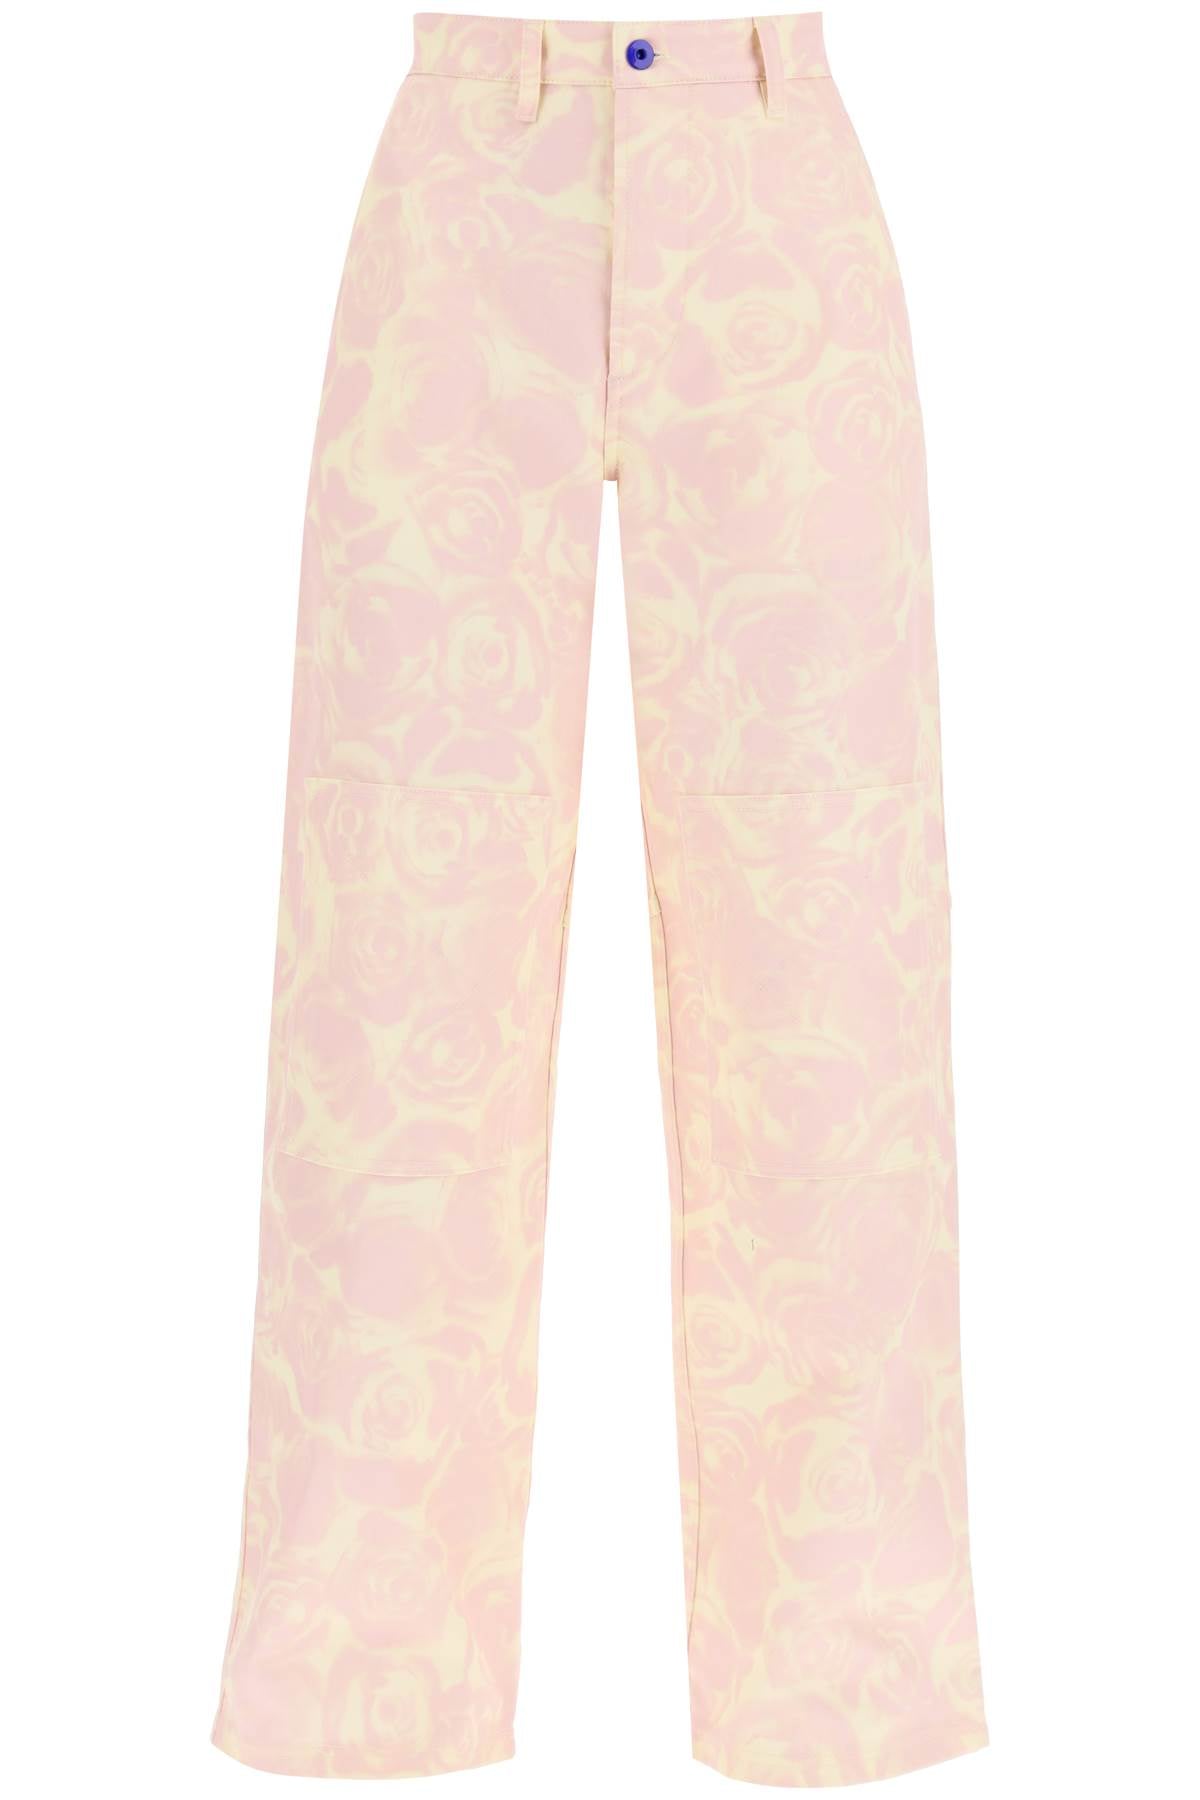 Burberry "rose print canvas workwear pants"-women > clothing > trousers-Burberry-Urbanheer